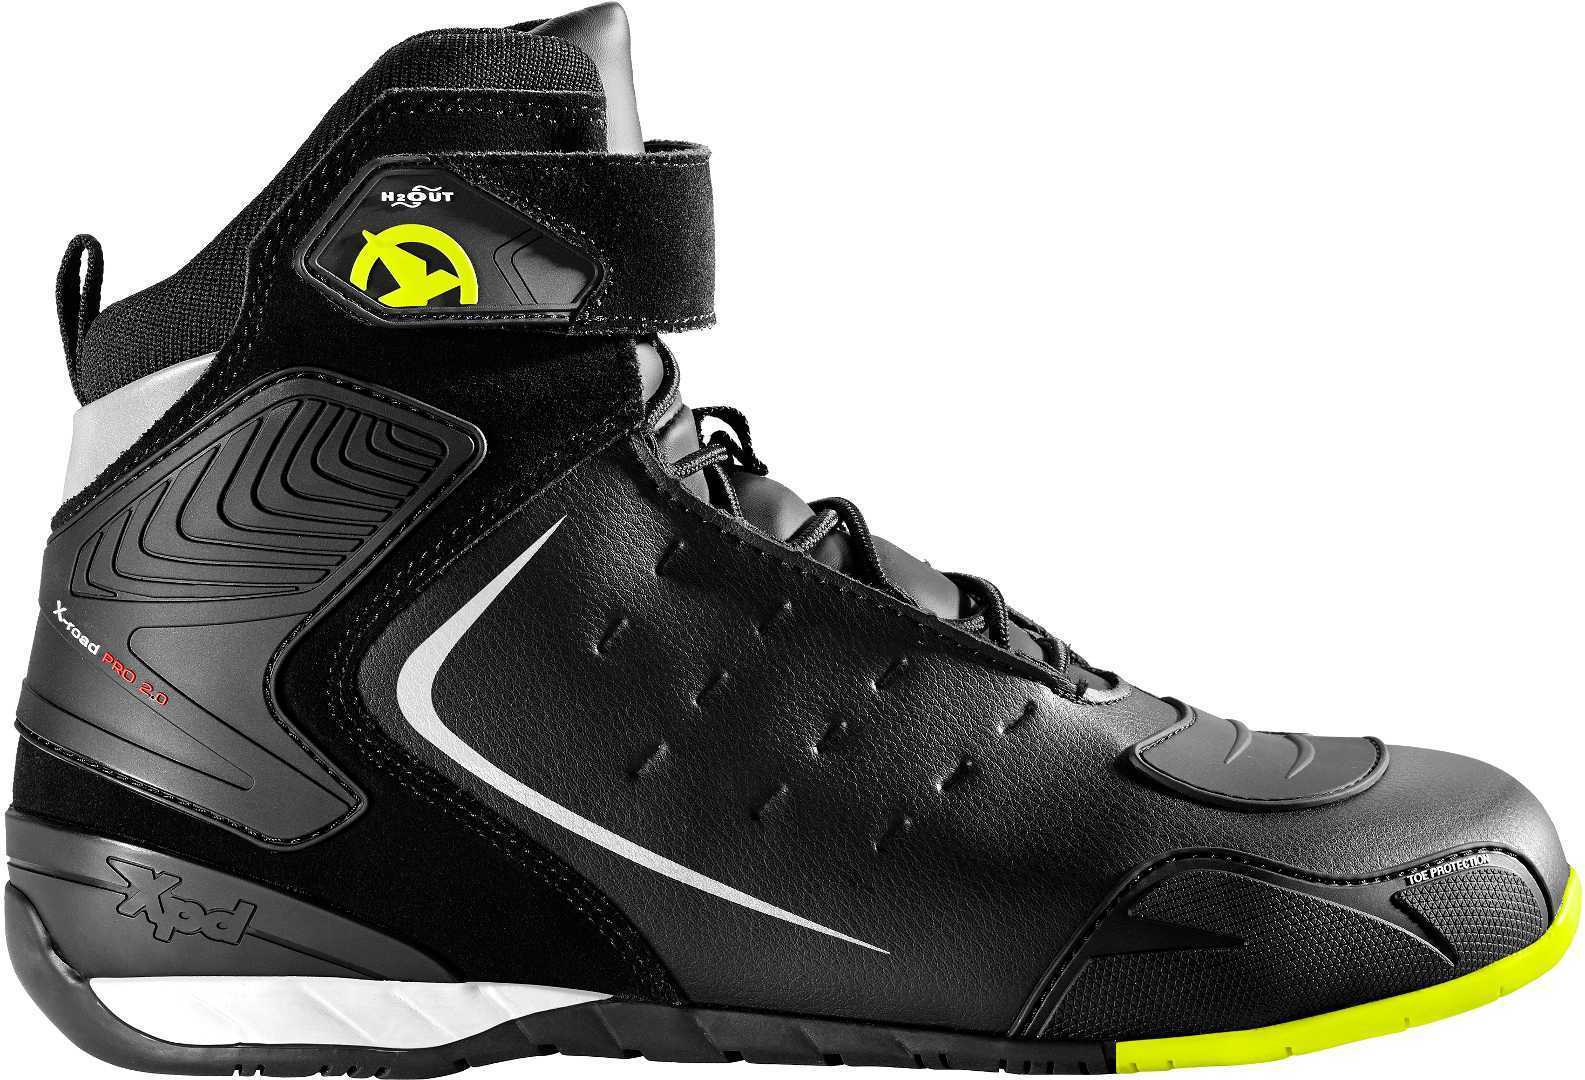 Image of XPD X-Road H2Out Yellow Fluo Size 40 ID 8030161345124